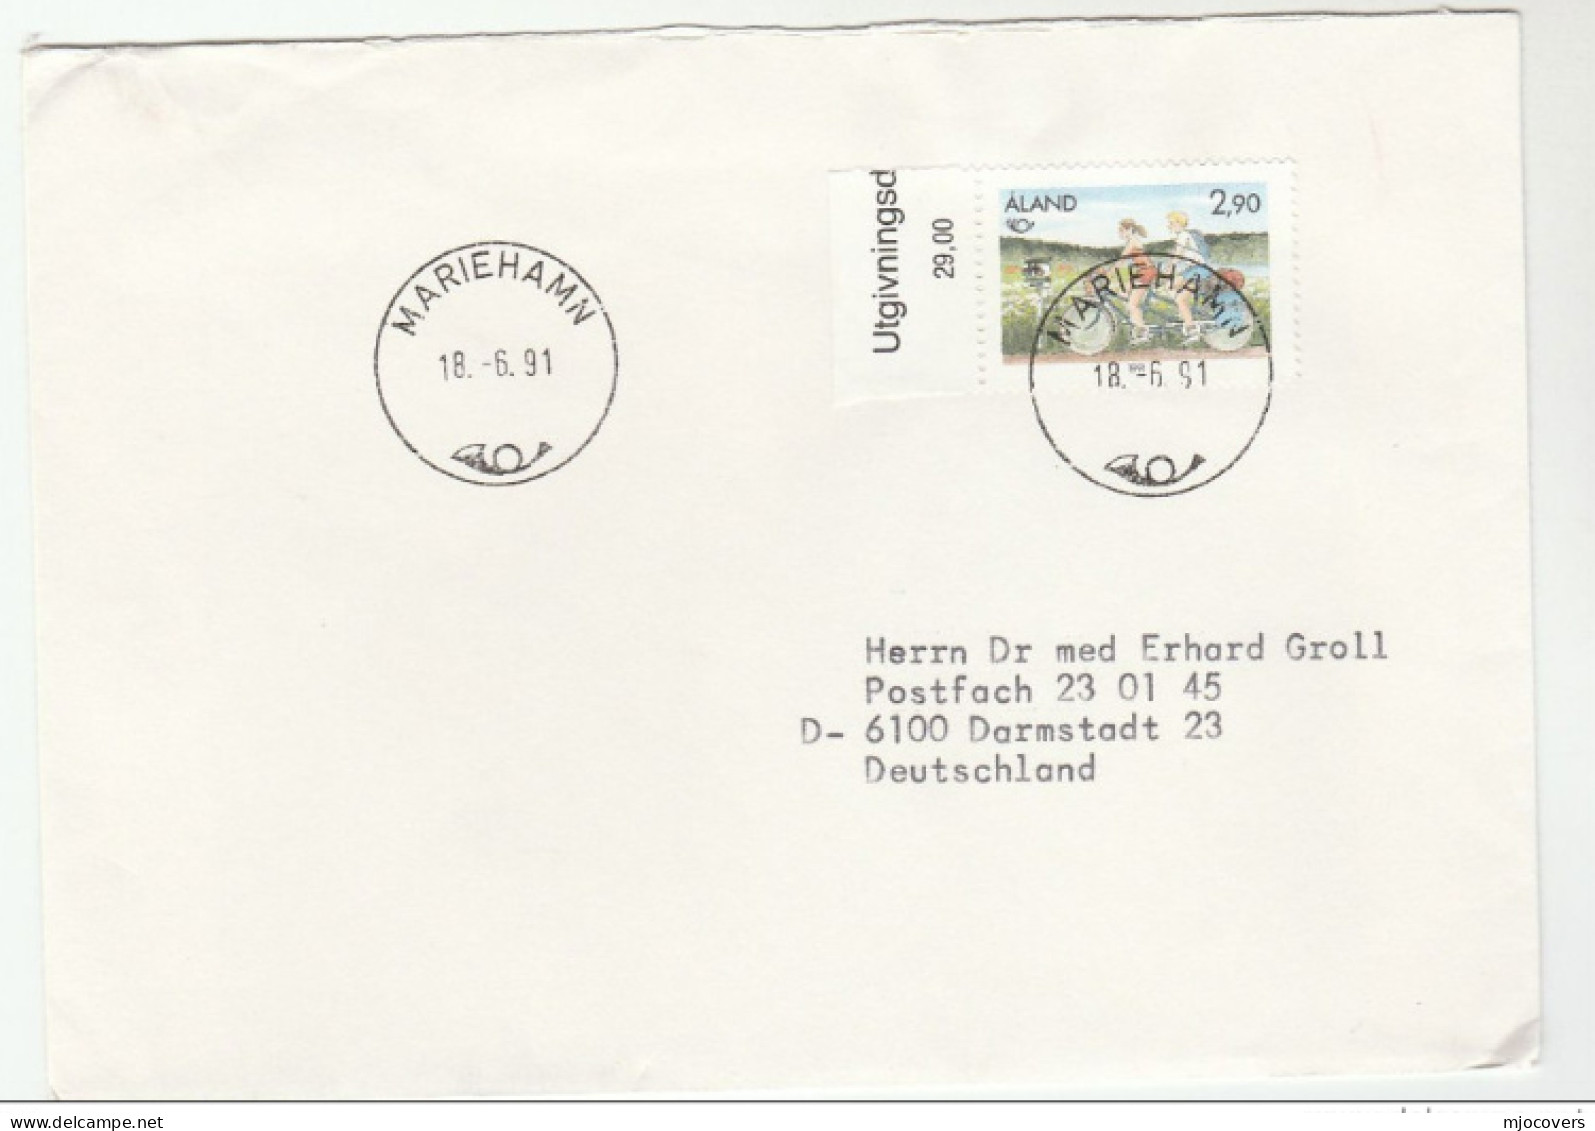 CYCLING Mariehamn ALAND Cover To Germany Bike Bicycle 1991 Stamps - Wielrennen